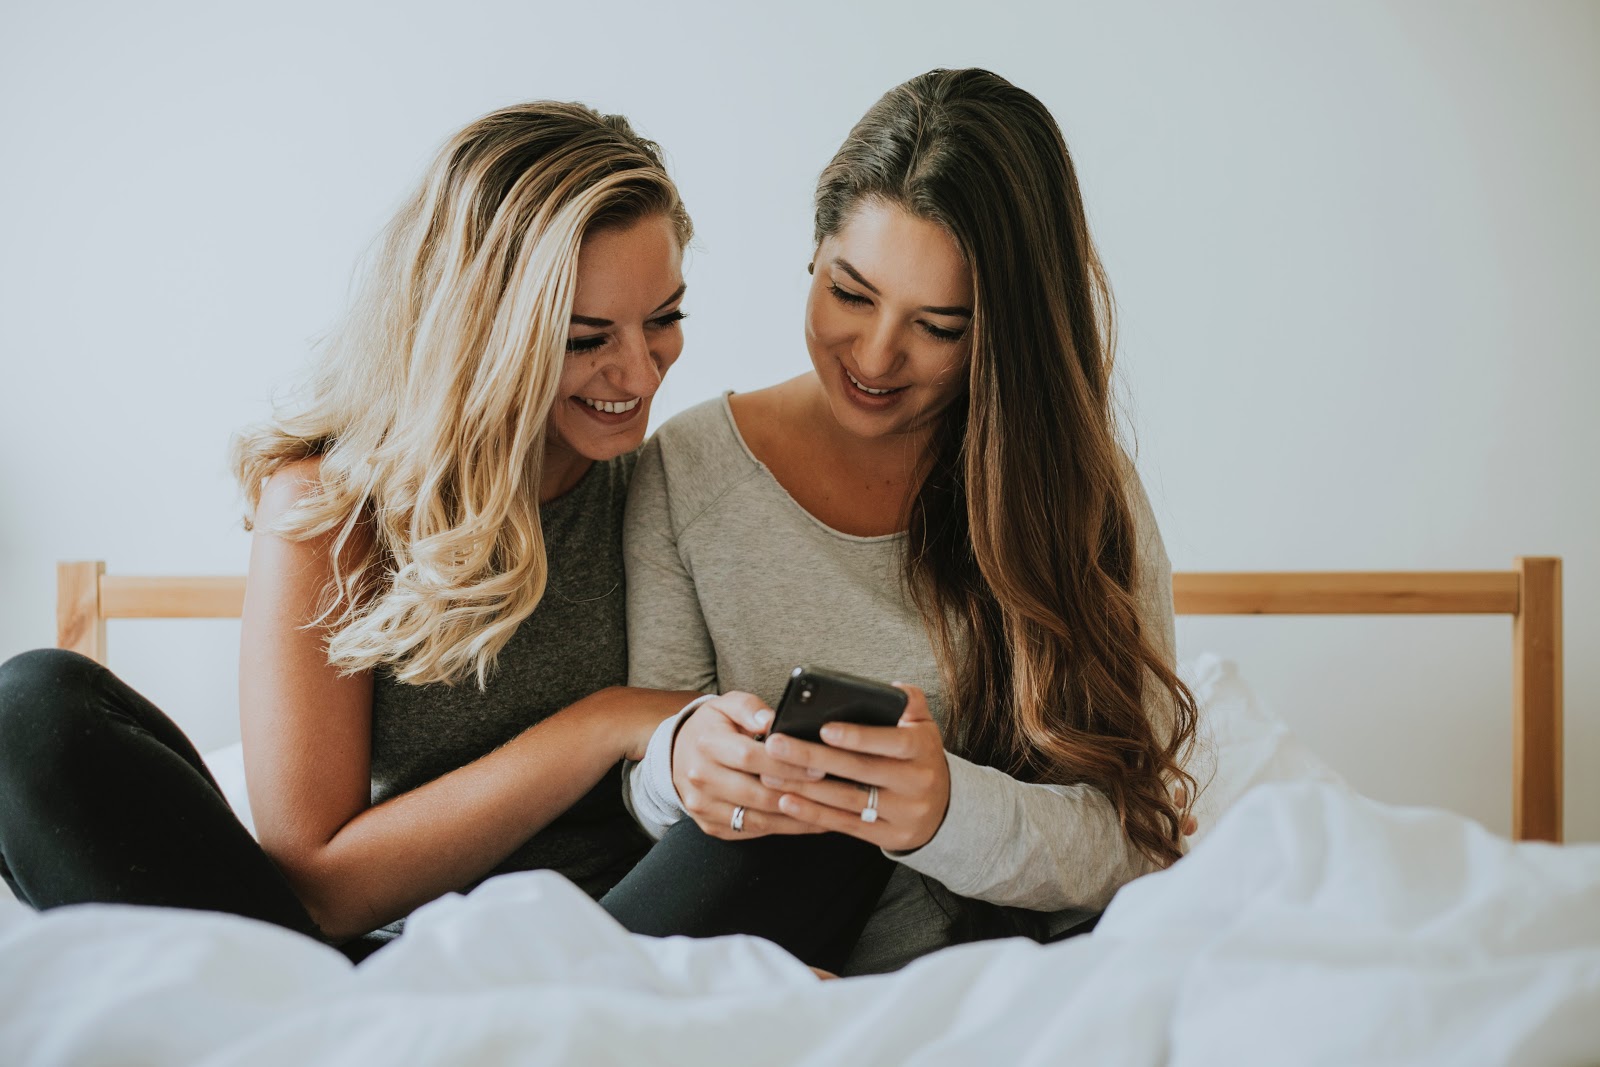 Mark Roemer image of two people sitting on a bed that appear to be roommates looking at a phone